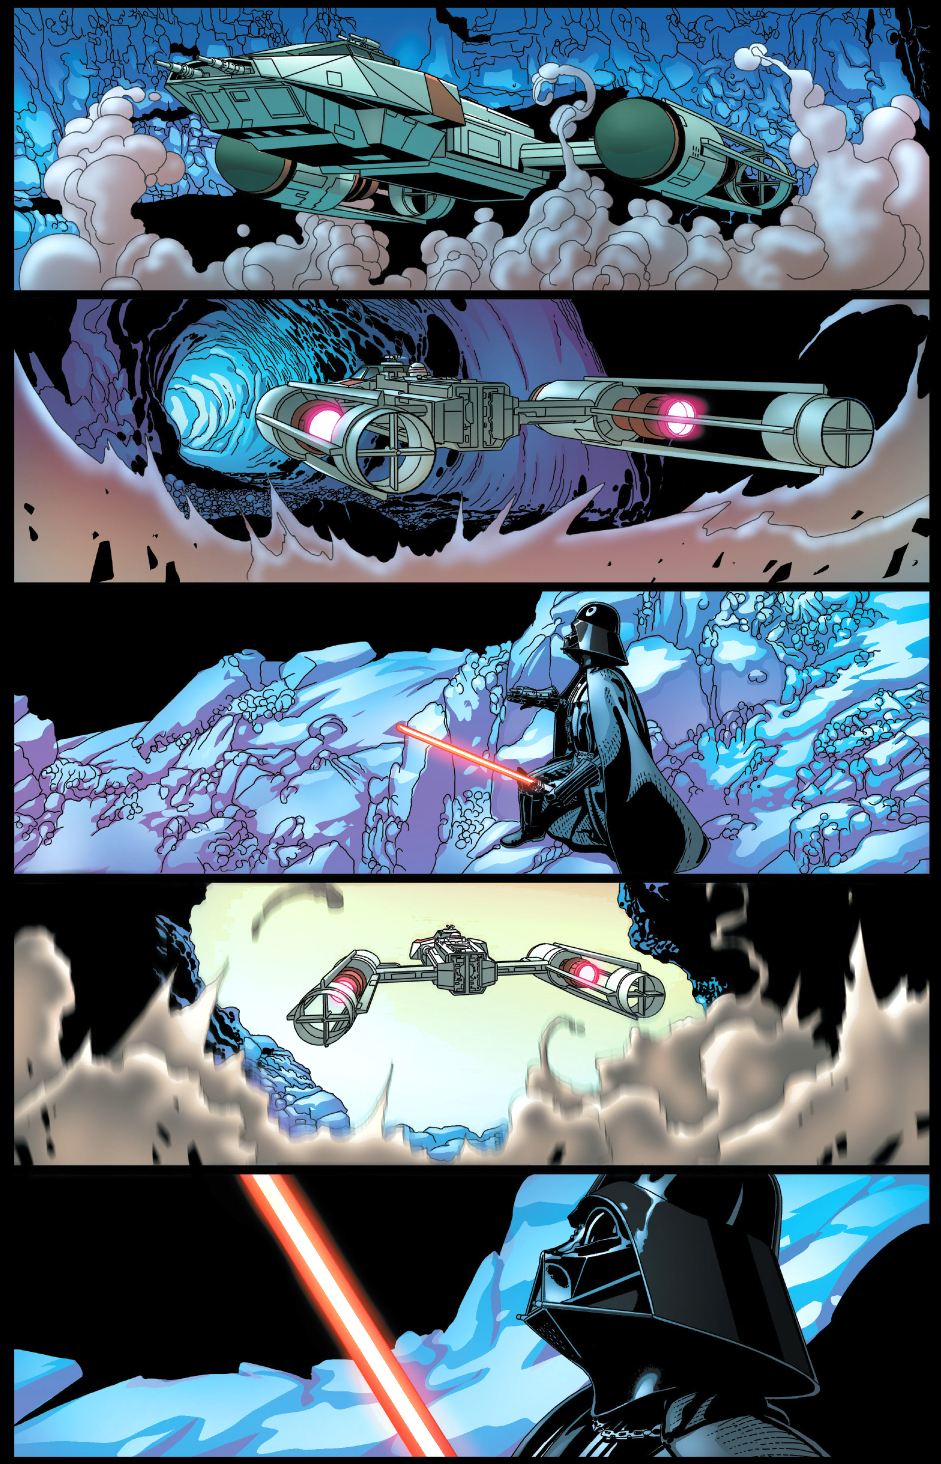 darth vader shots down a y-wing with a lightsaber 